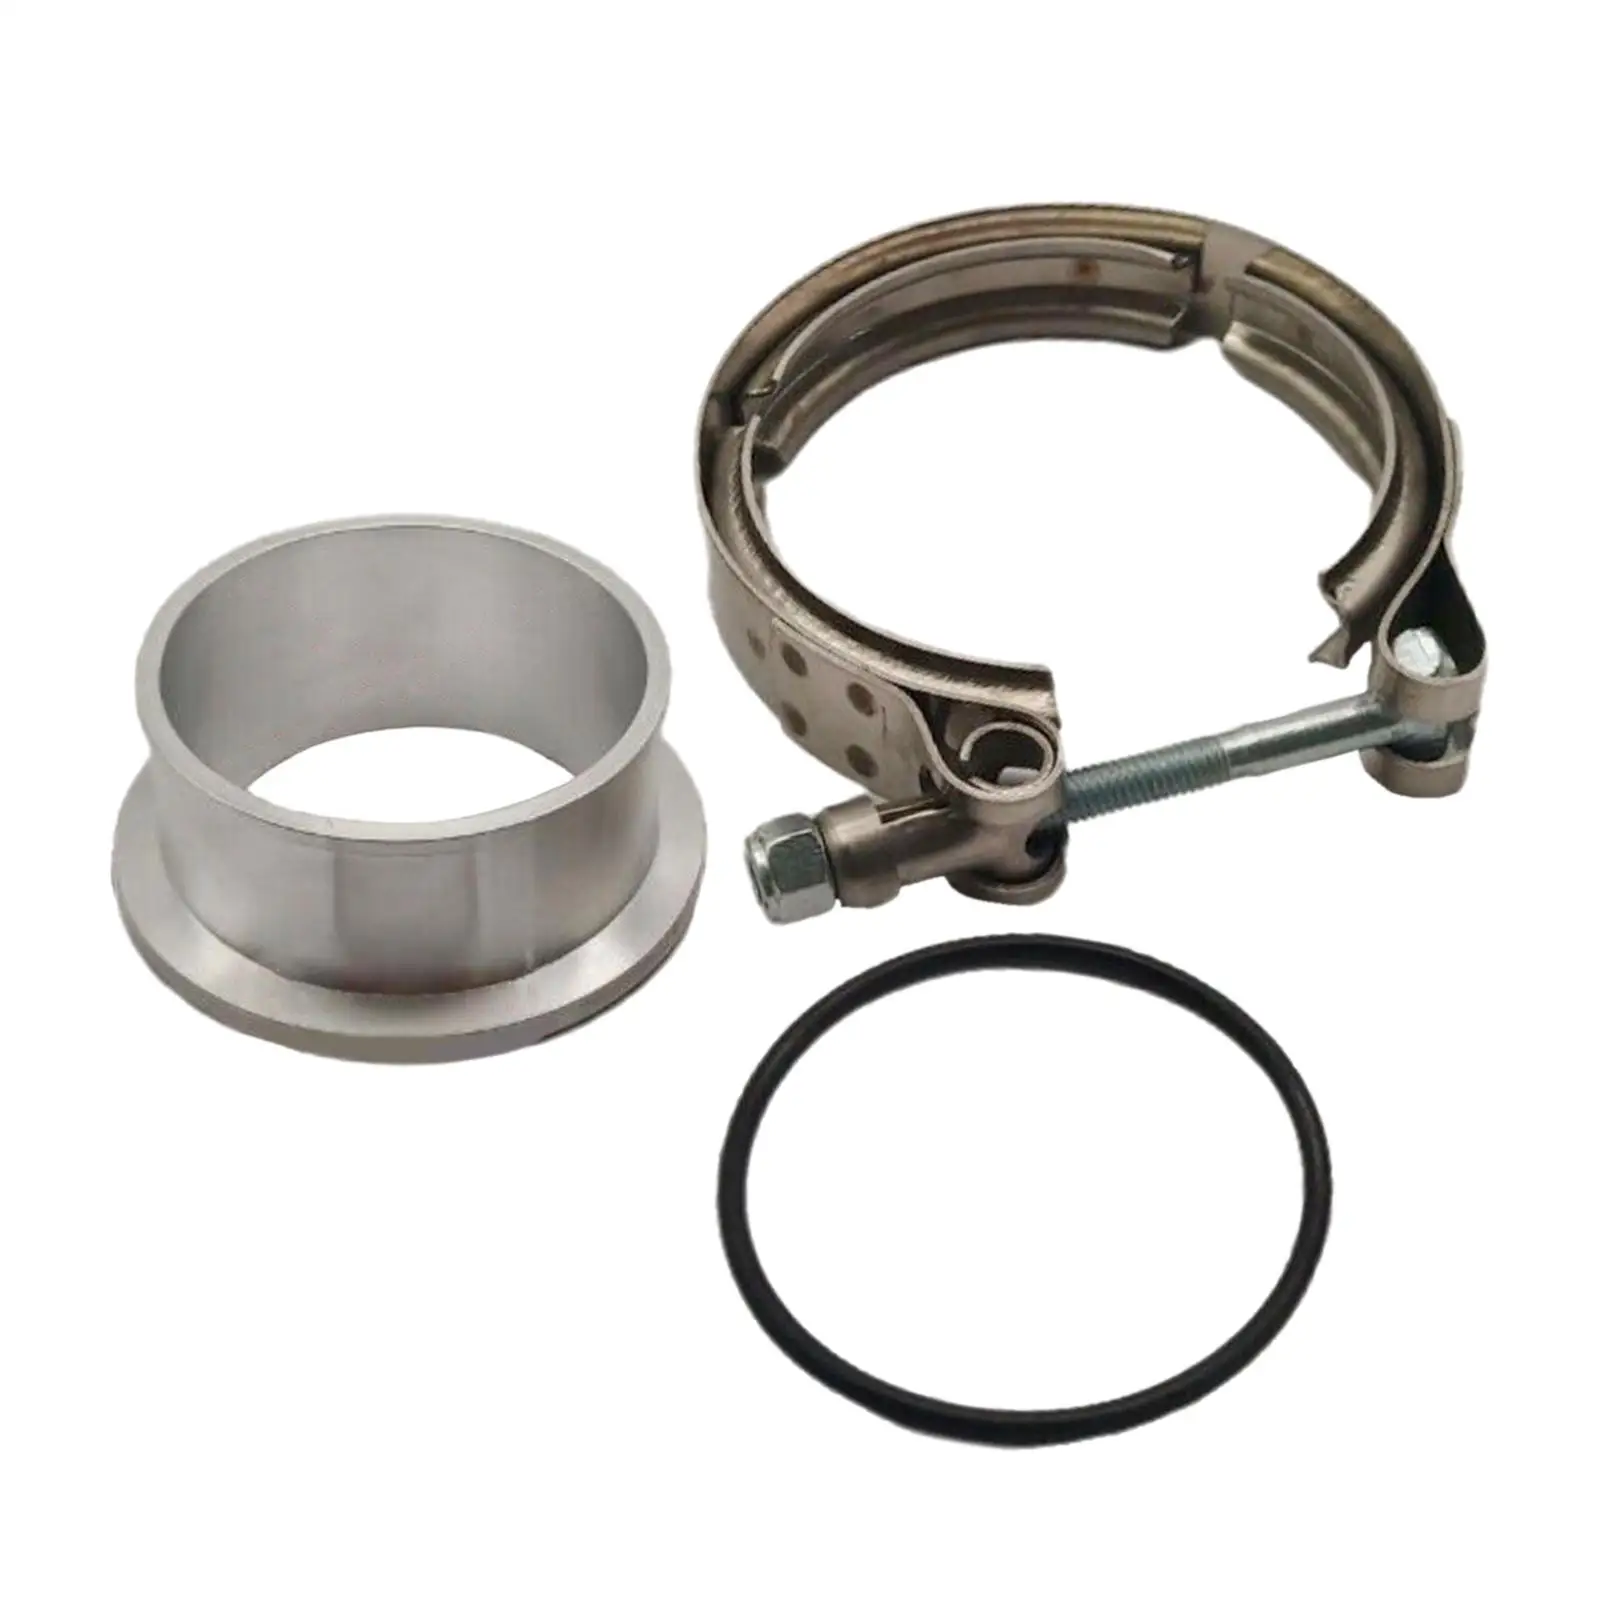 V Band Clamp Sturdy Turbo Compressor Flange Clamp Exhaust Tube Turbo Outlet Clamp for Cummins 5.9L Holset Replacement Parts